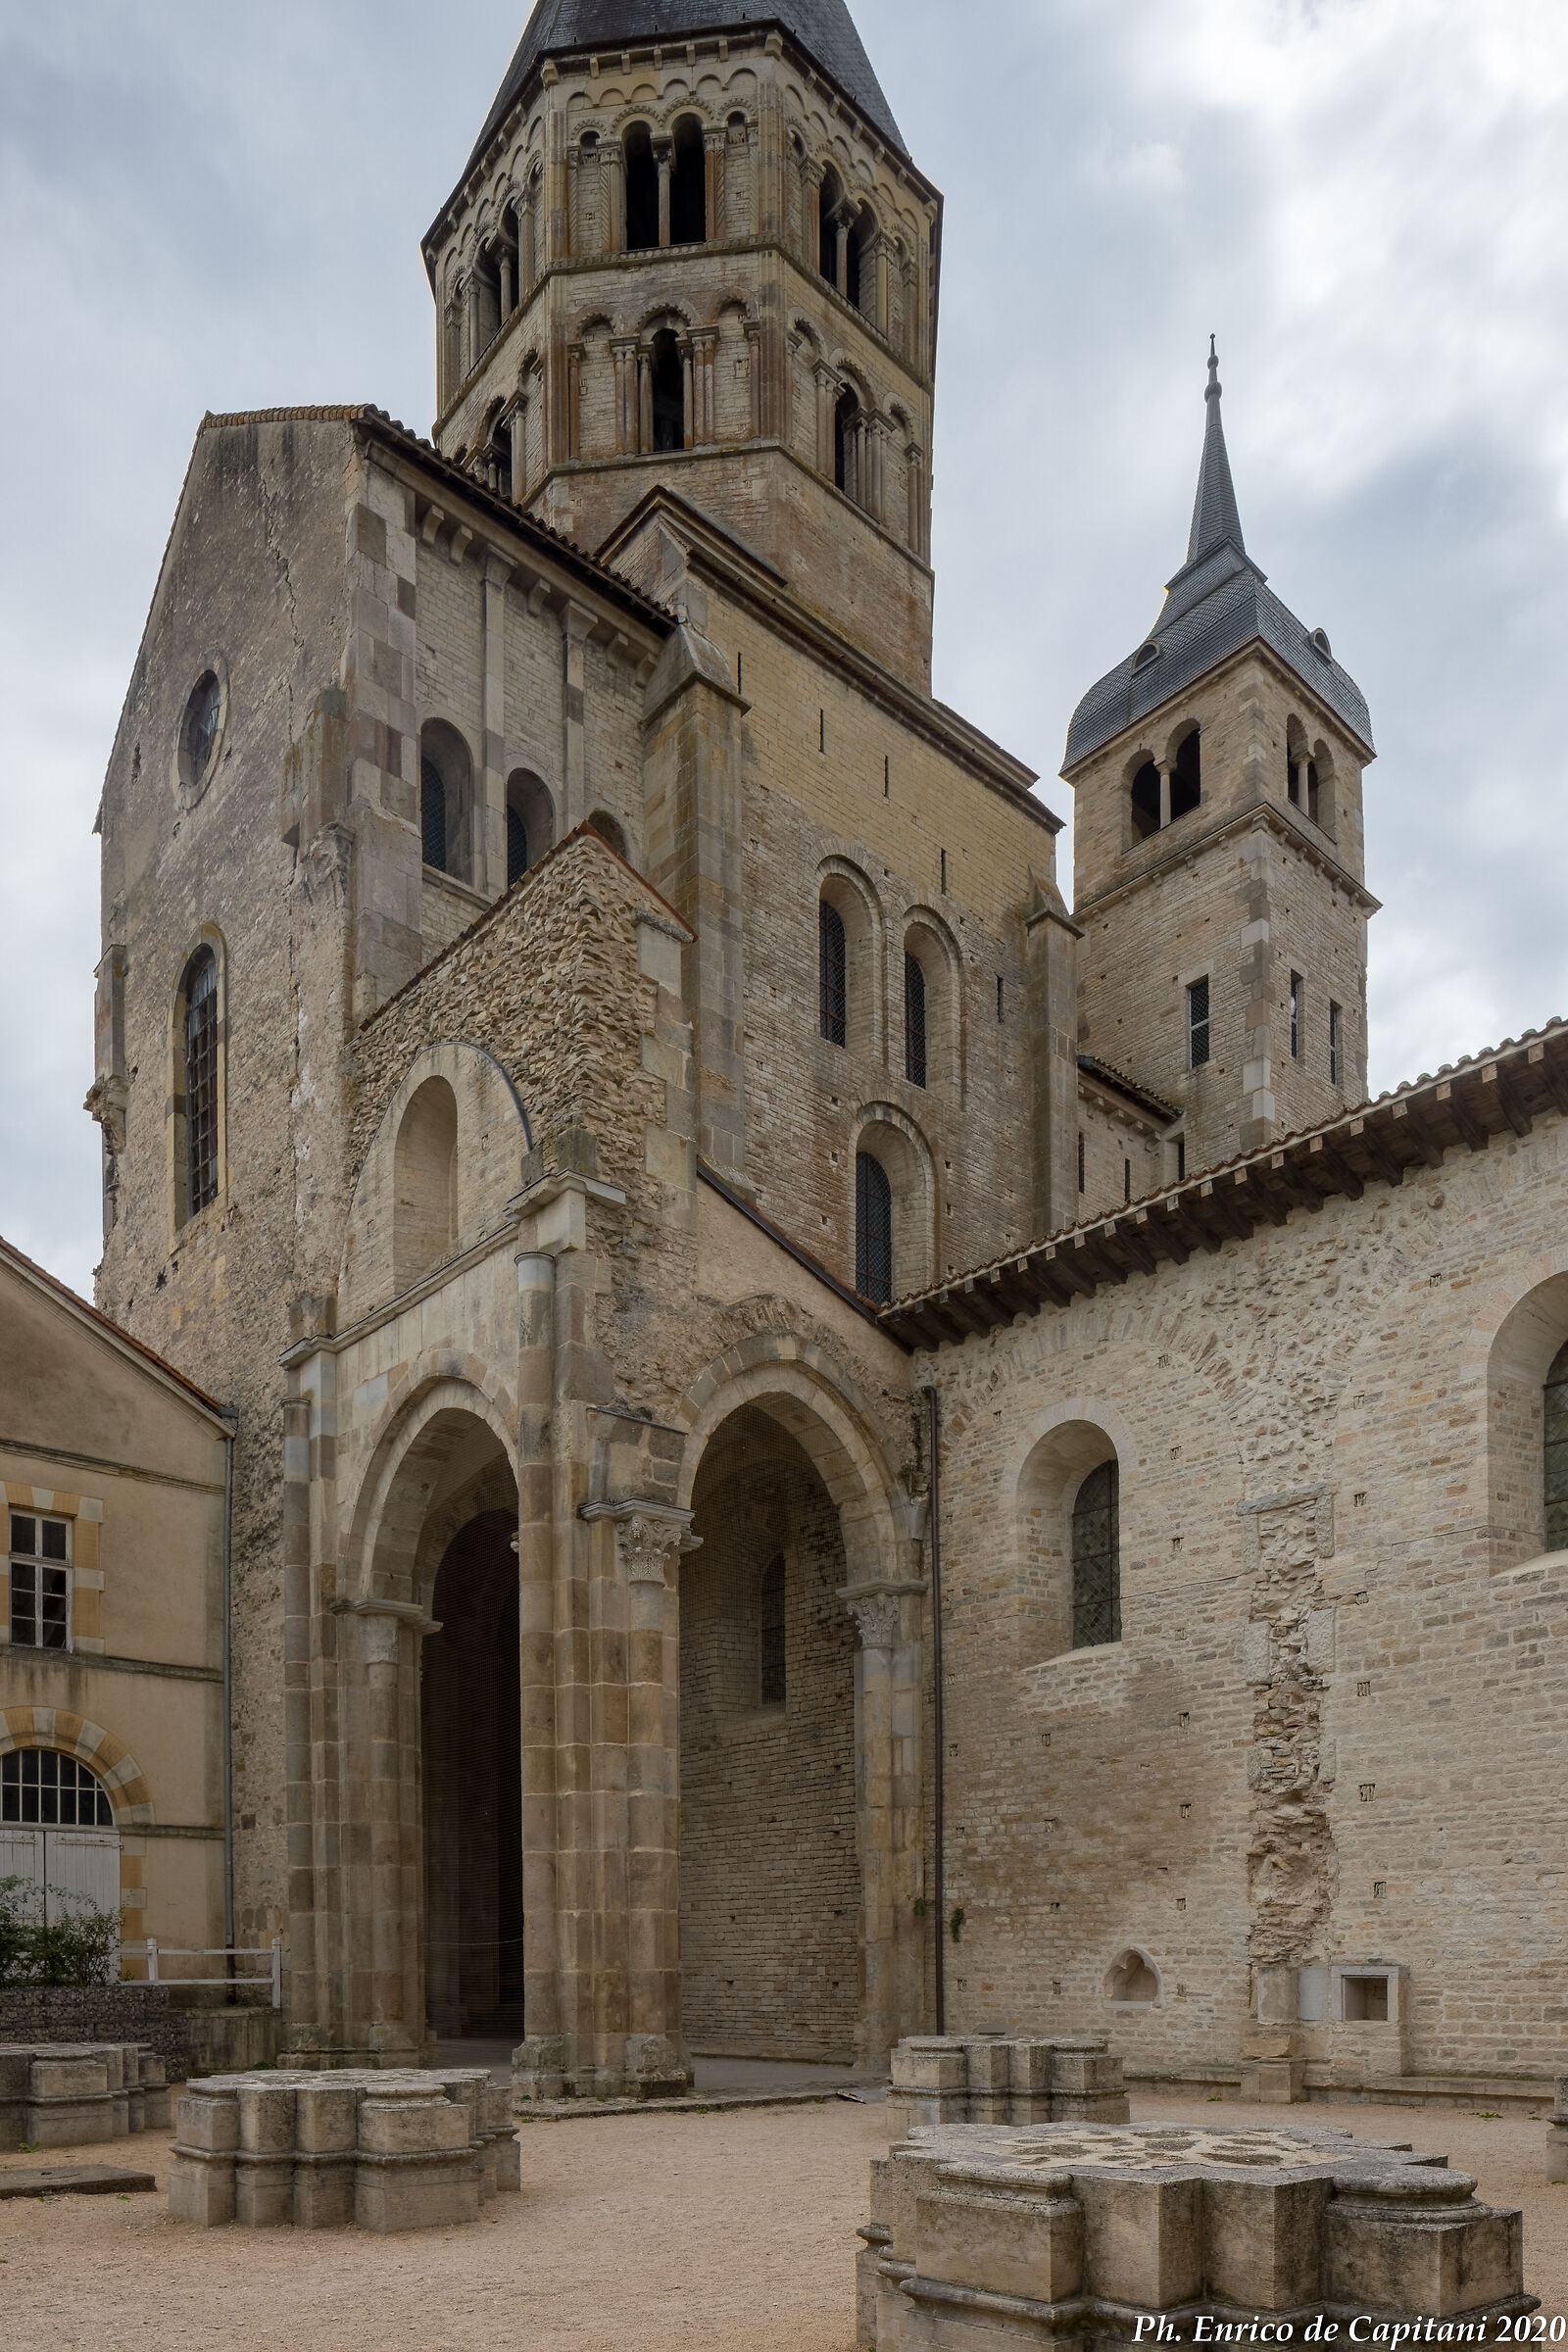 Cluny: the towers of blessed water and clock...